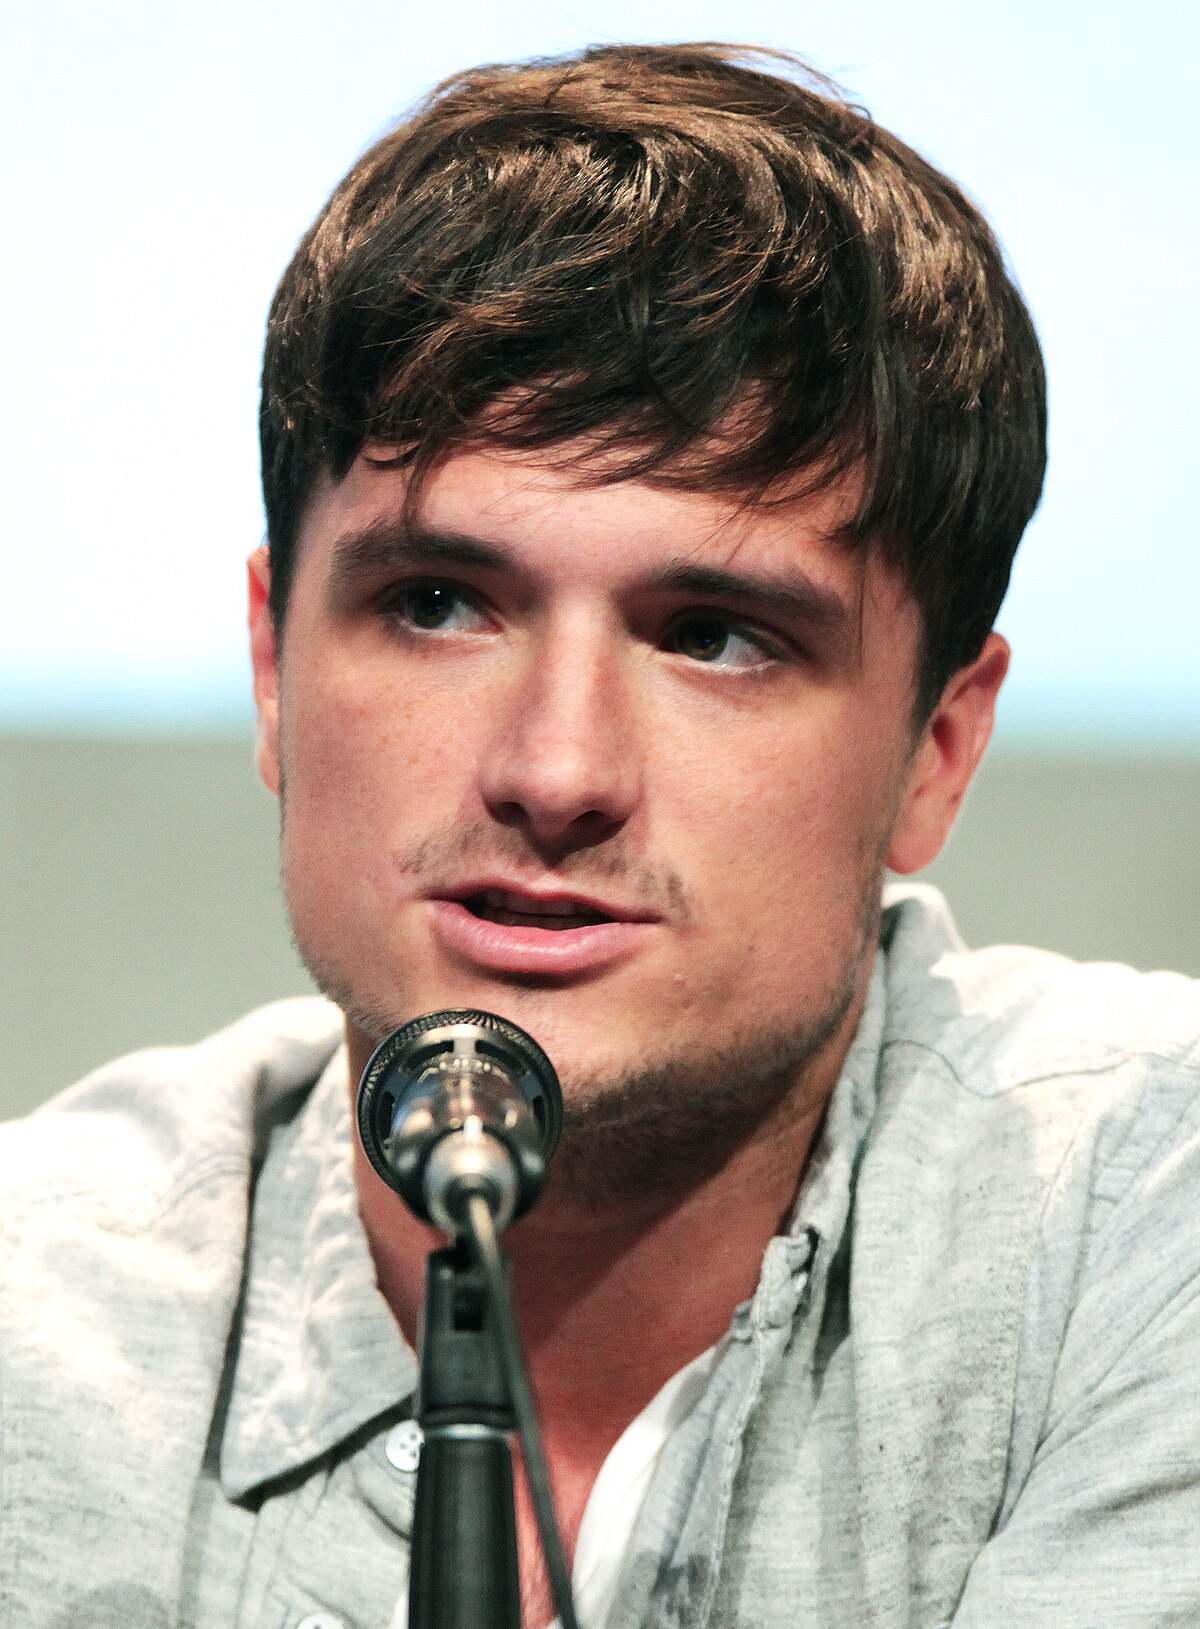 Josh Hutcherson smiling, wearing an open patterned brown and tan flannel, with a brown shirt underneath